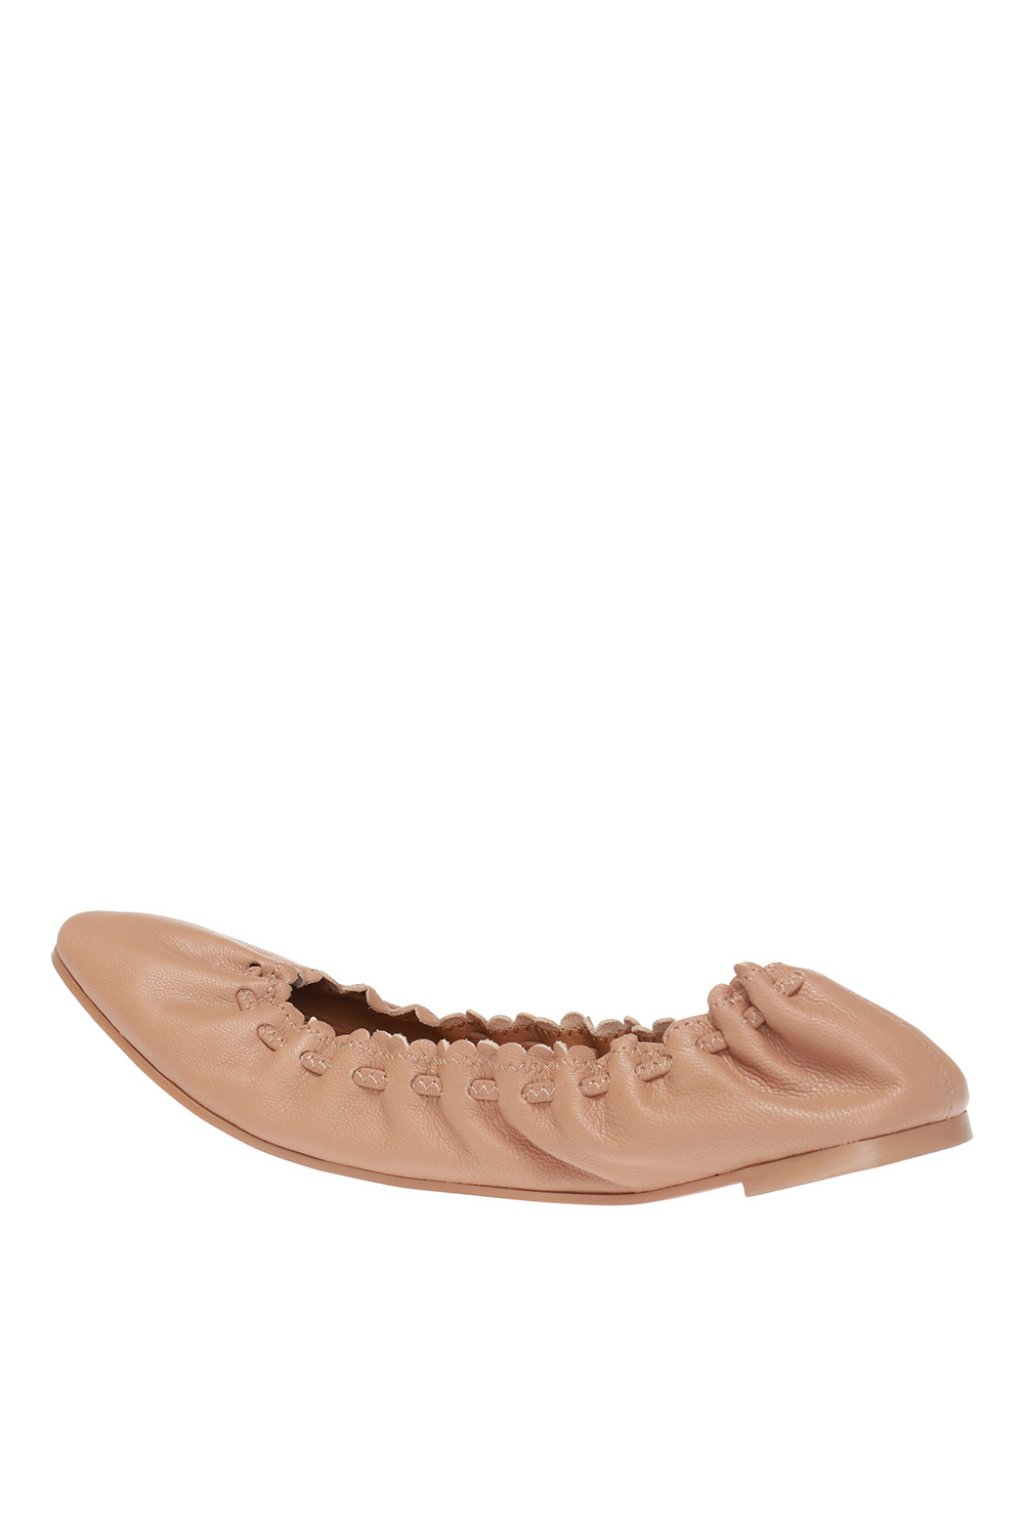 See By Baileys chloe Ballet flats with woven details